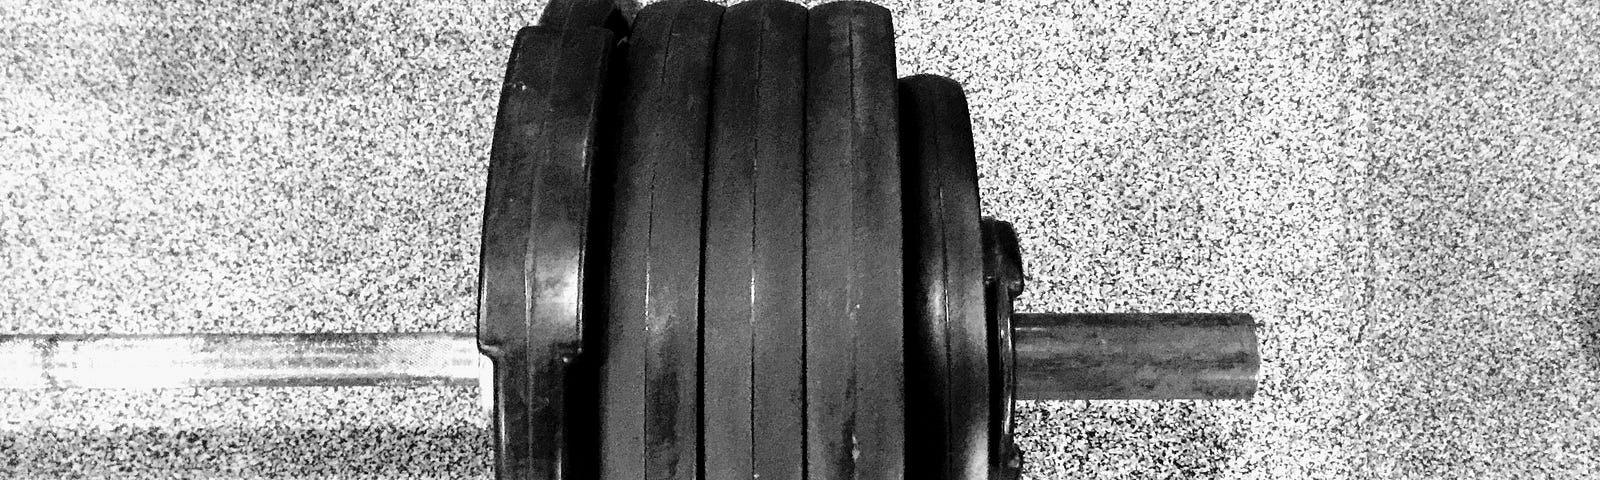 A barbell with plates on the floor